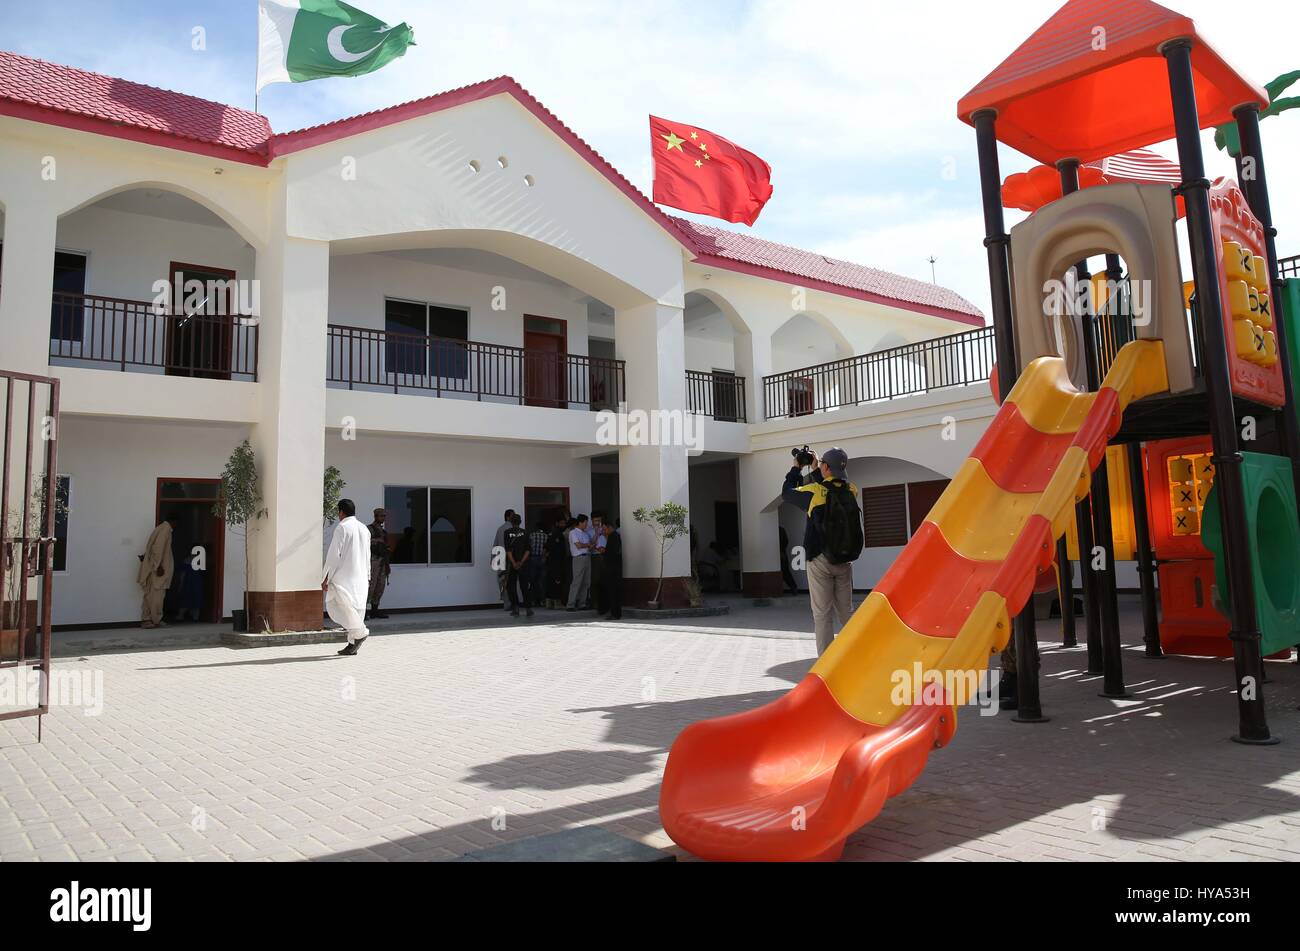 (170403) -- GWADAR(PAKISTAN), April 3, 2017 (Xinhua) -- Photo taken on March 22, 2017 shows a China-donated primary school in Gwadar, Pakistan. Gwadar, an poorly-known port town previously in Pakistan has been becoming a new economic engine for the country with the construction of a free zone co-built with China. (Xinhua/Liu Tian) (sxk) Stock Photo